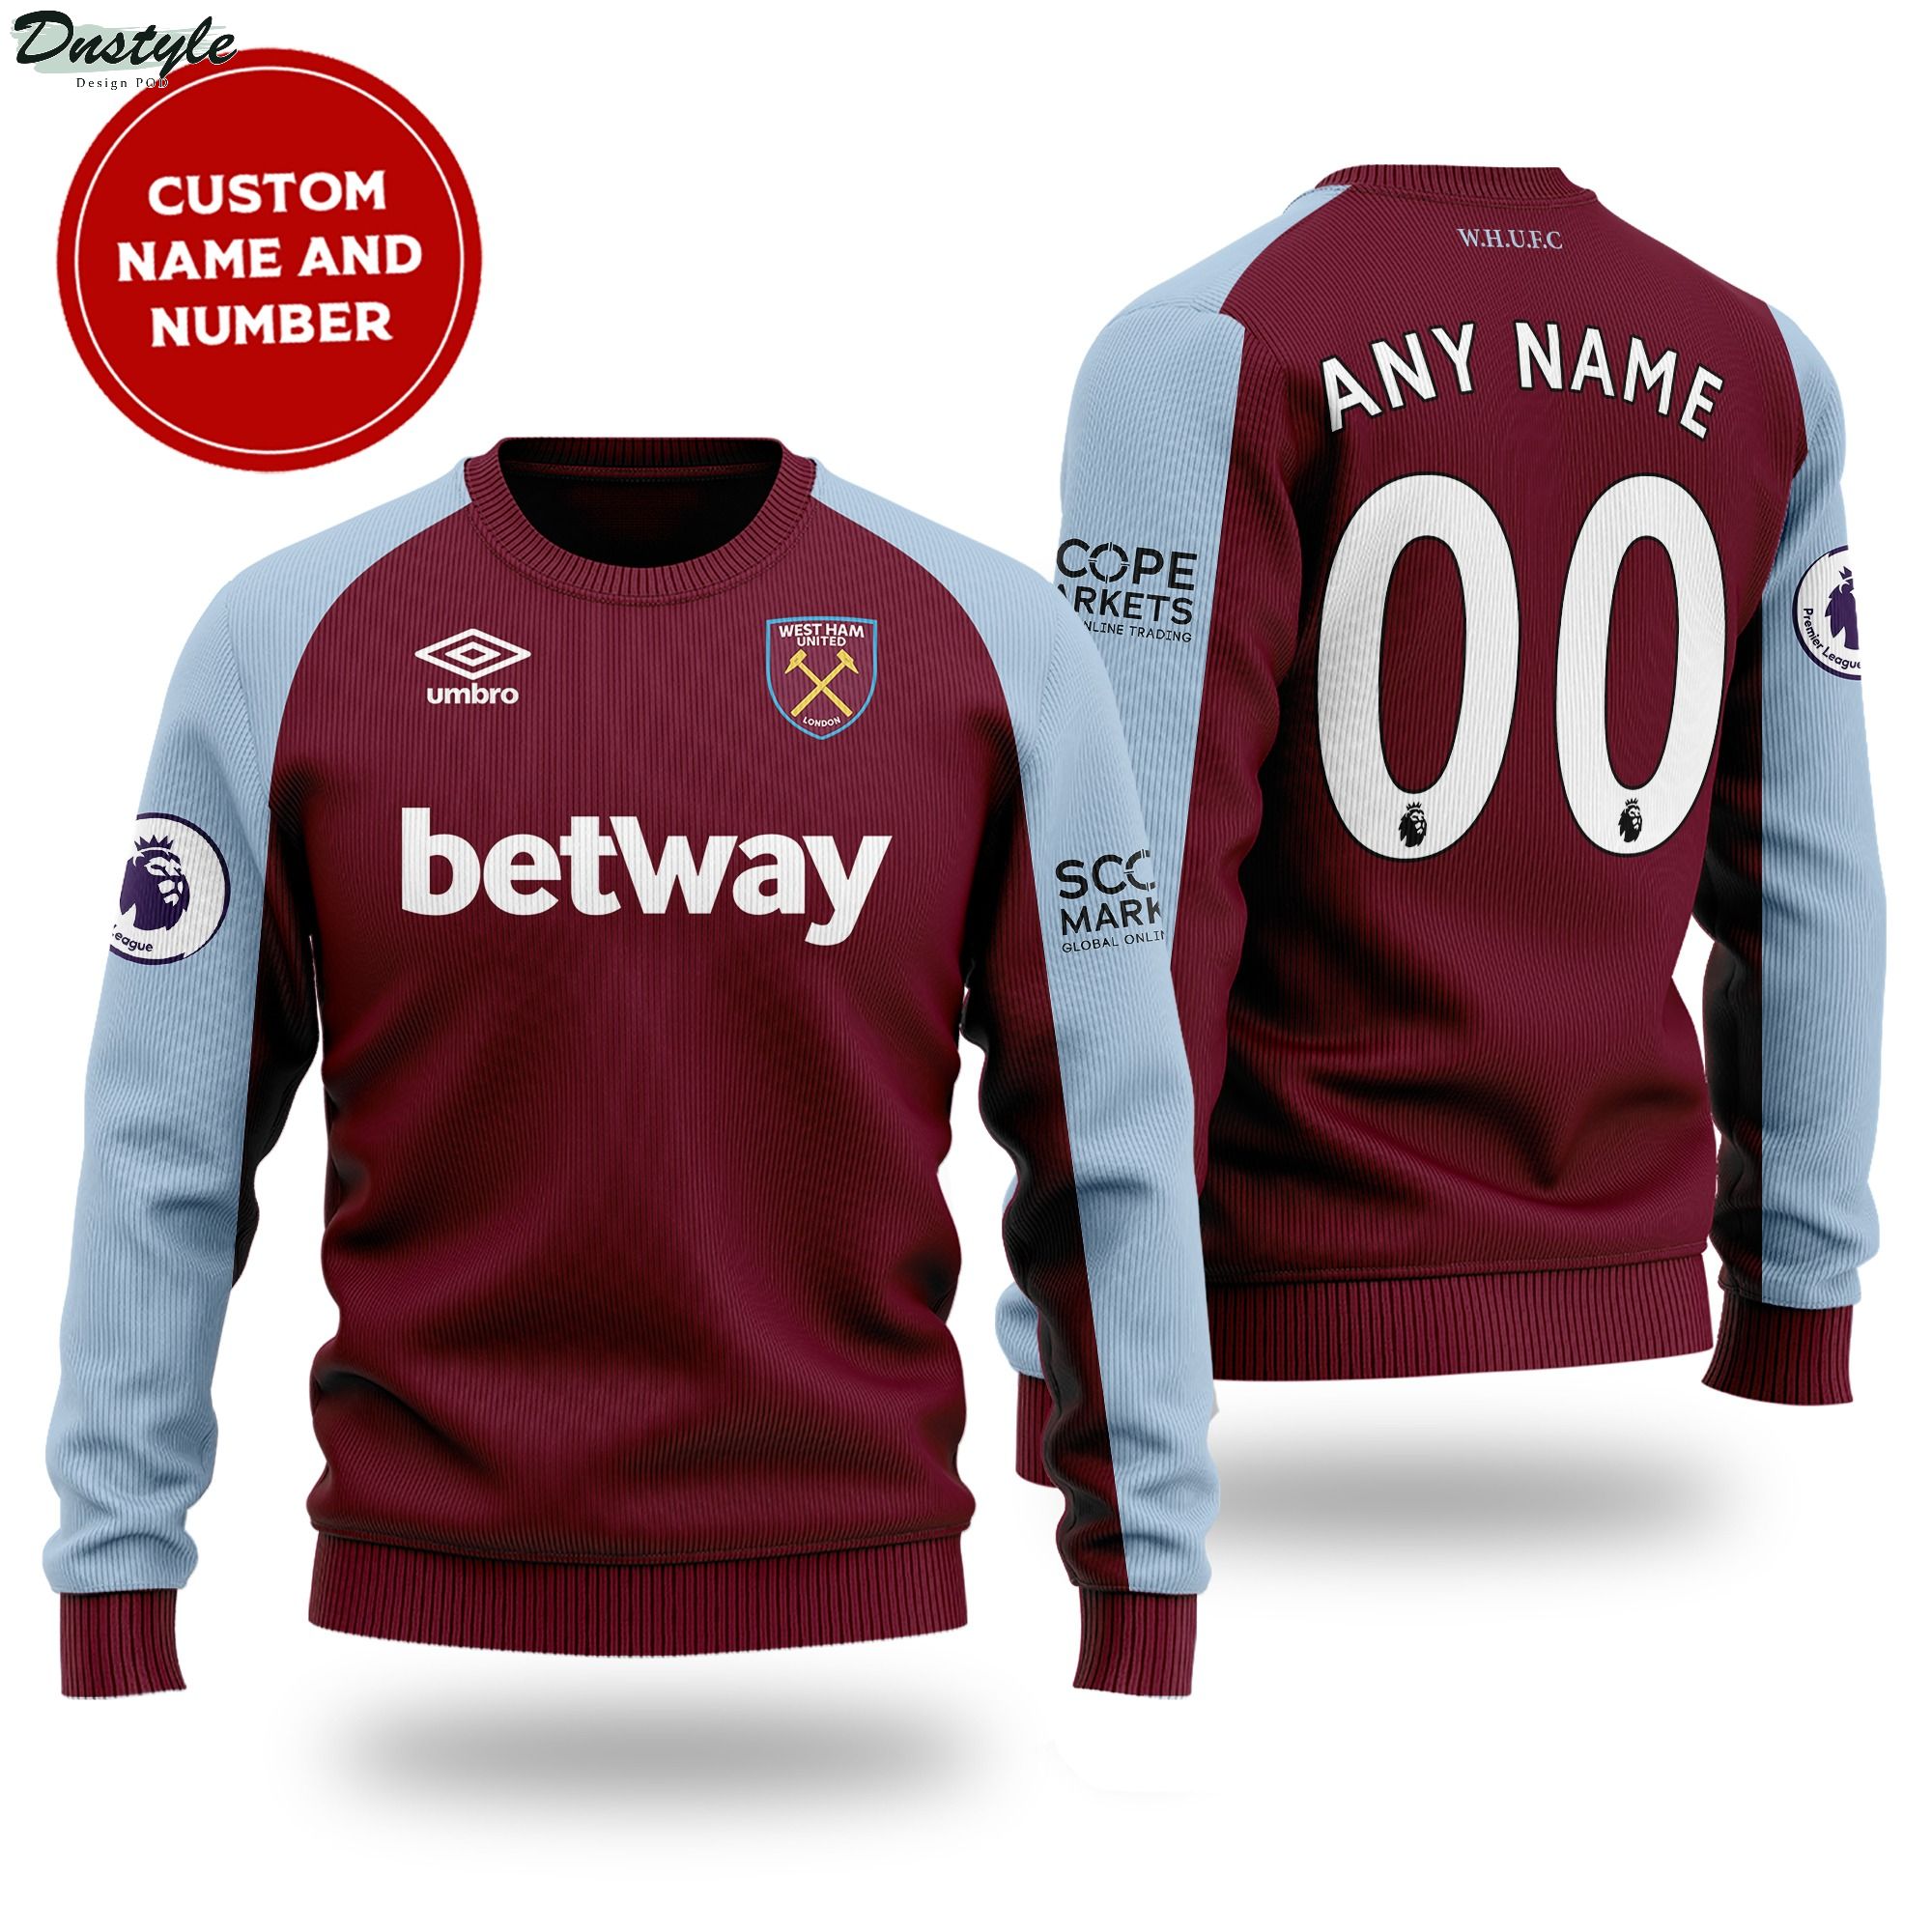 West ham custom name and number ugly sweater